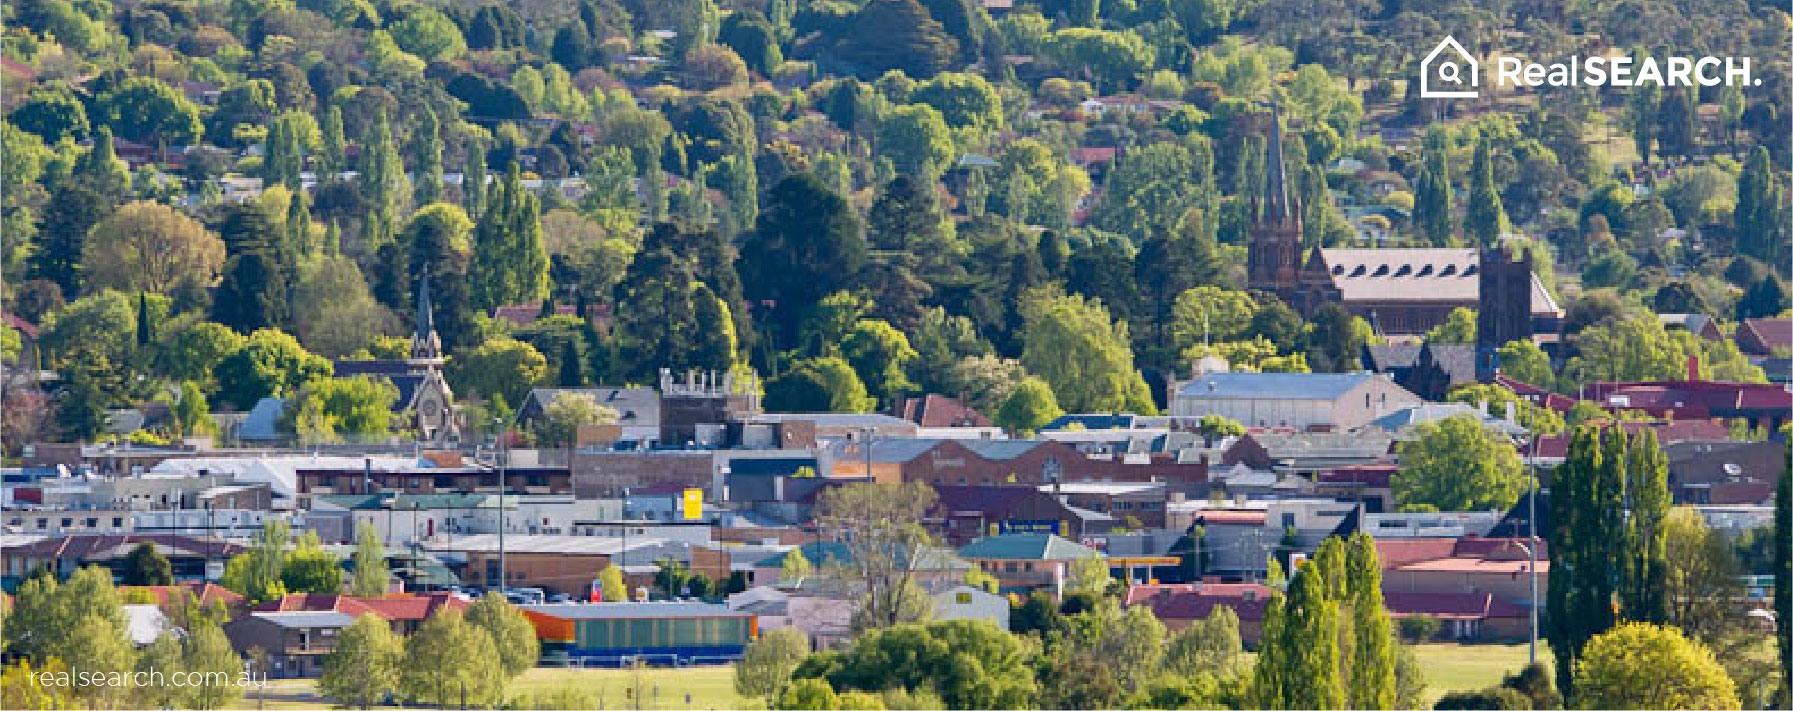 Armidale NSW 2350: A Suburb on the Rise